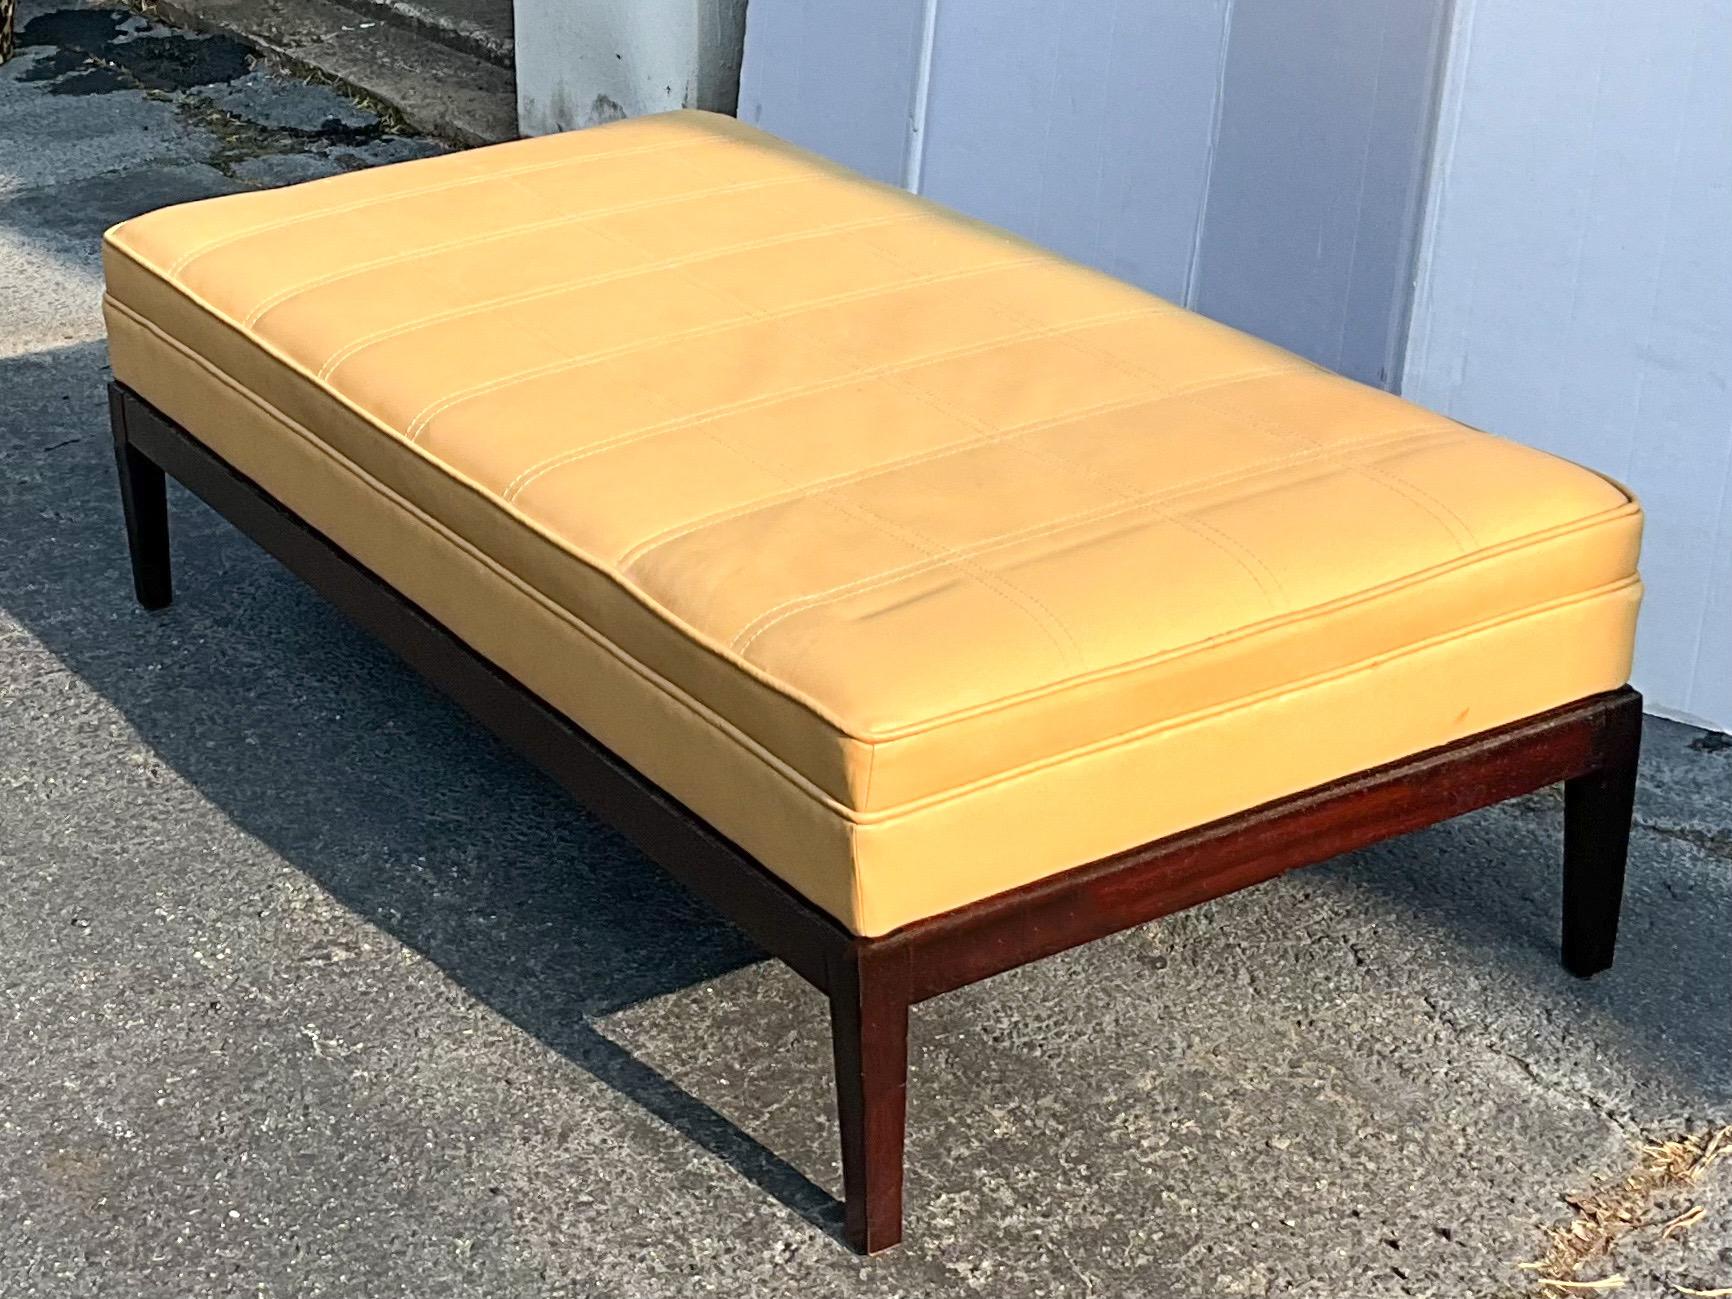 20th Century English George Smith Modern Leather Upholstered Ottoman / Coffee Table For Sale